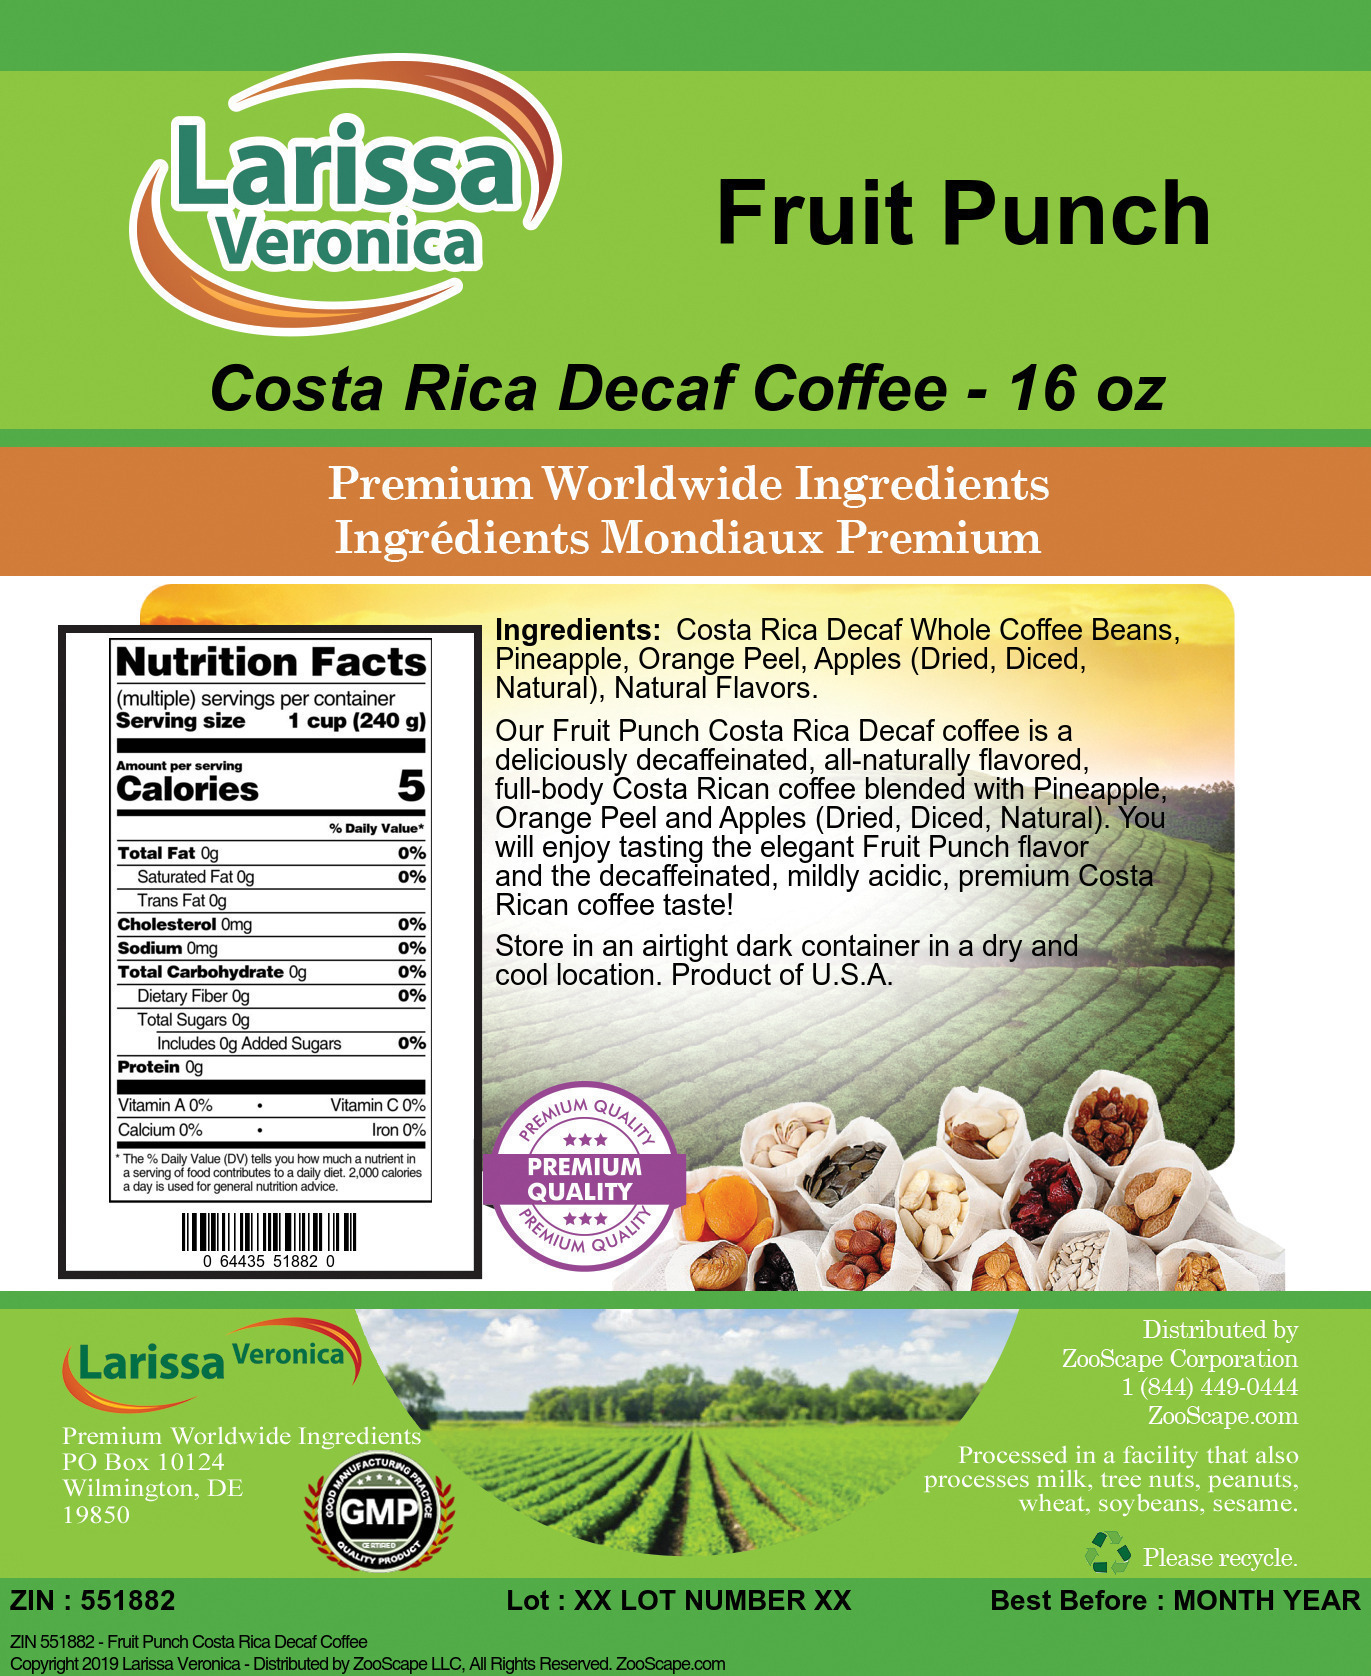 Fruit Punch Costa Rica Decaf Coffee - Label